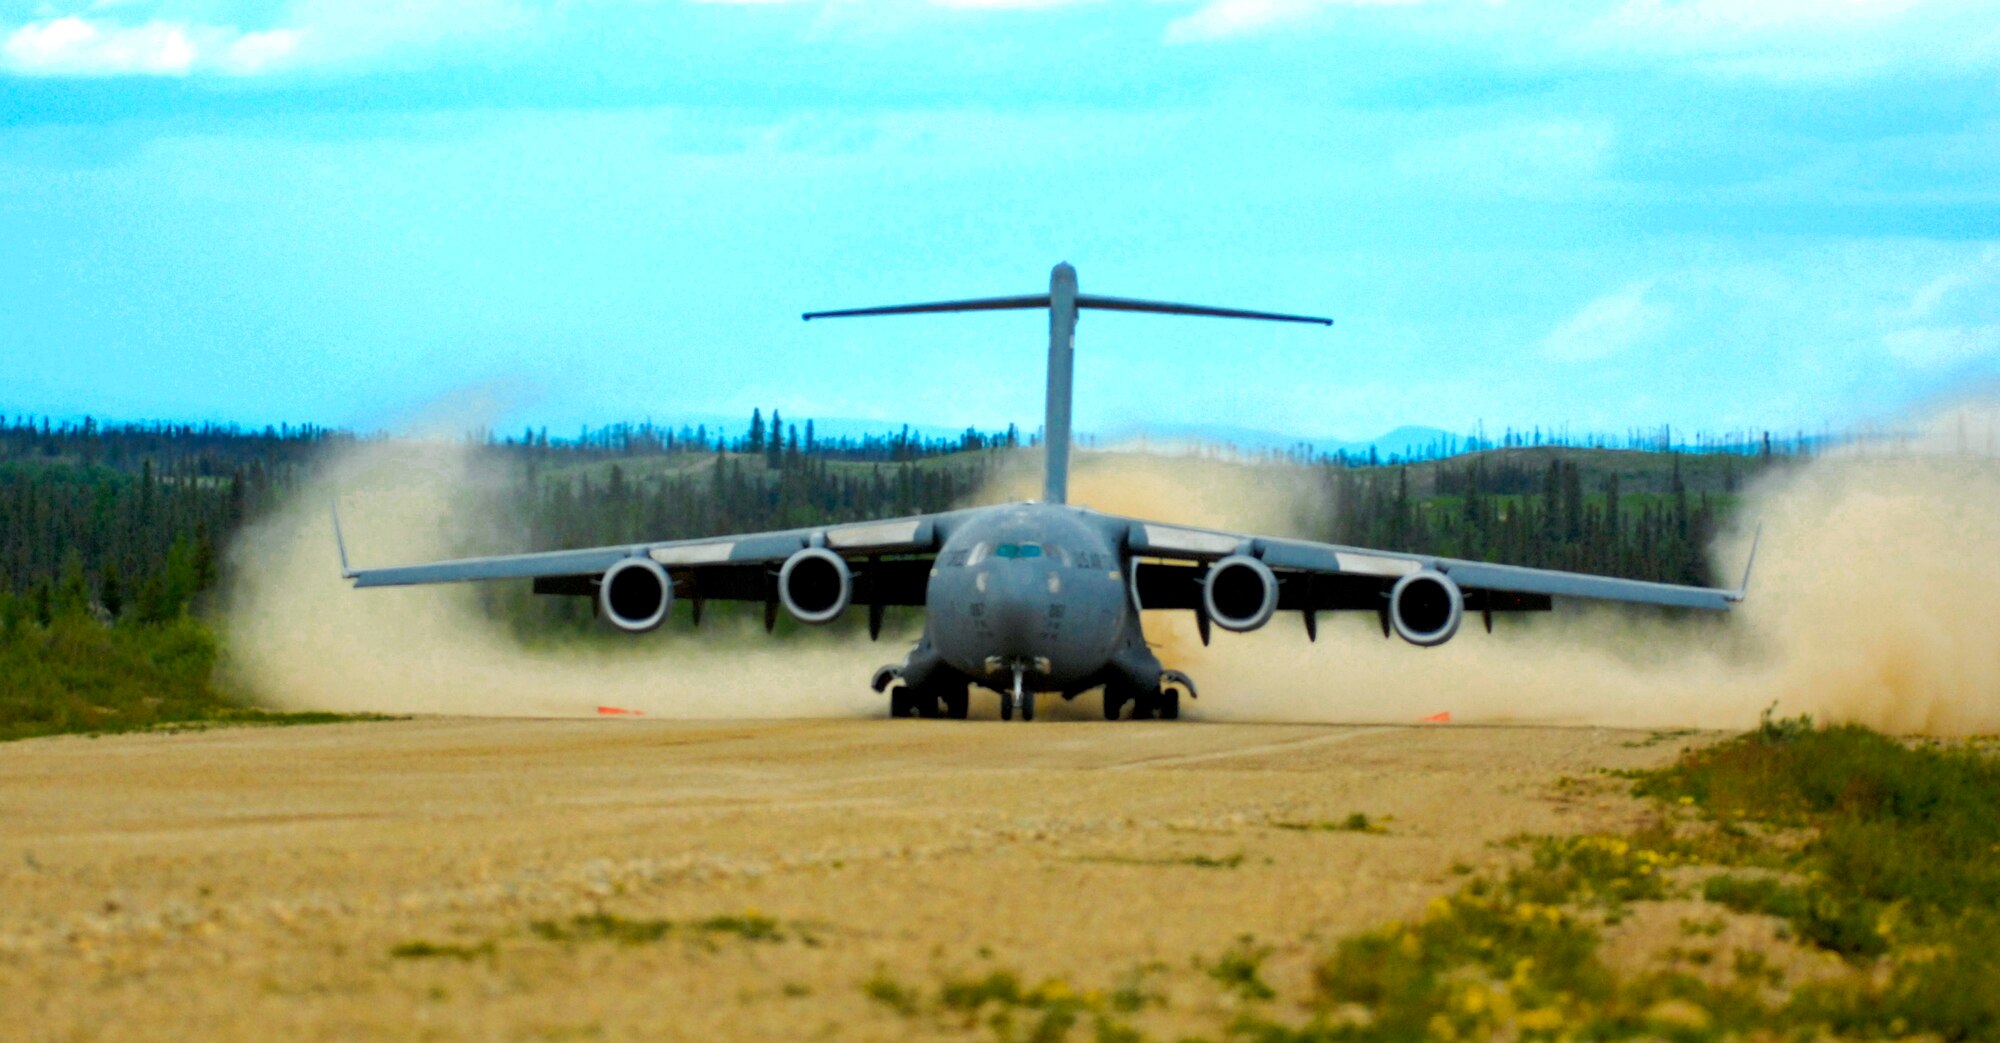 ELMENDORF AIR FORCE BASE, Alaska -- The second of two C-17 Globemaster IIIs land at Donnelly Field just south of Fort Greely, Alaska. These landings were the first C-17 dirt landings in Alaska. (U.S. Air Force photo/Airman 1st Class Morgan Sneed)